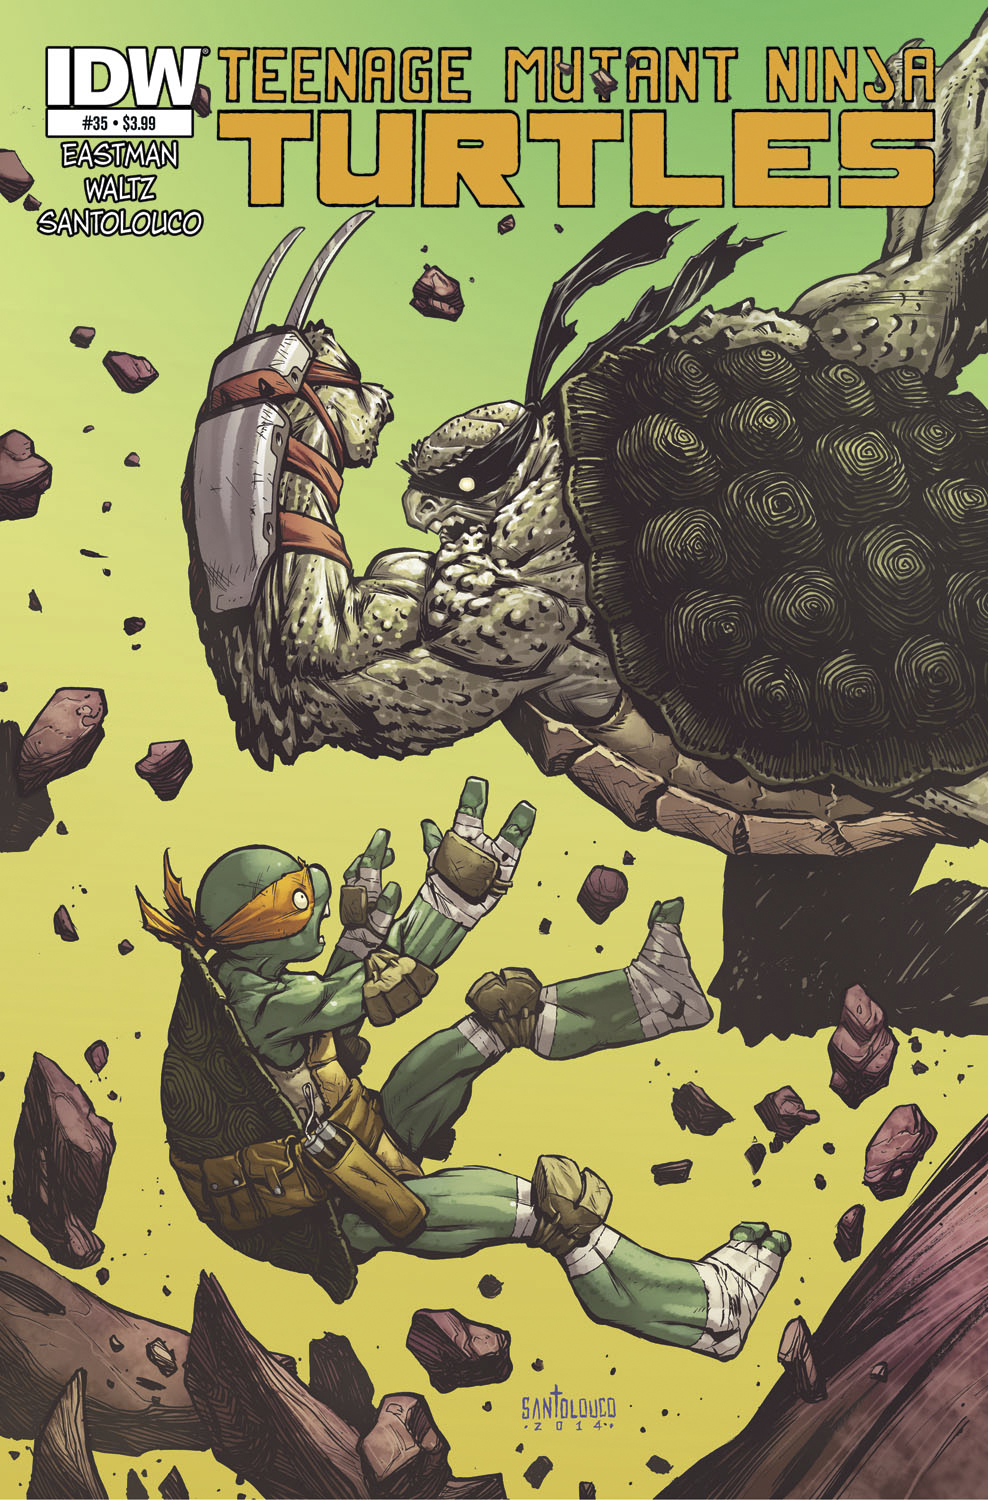 TMNT ONGOING #35